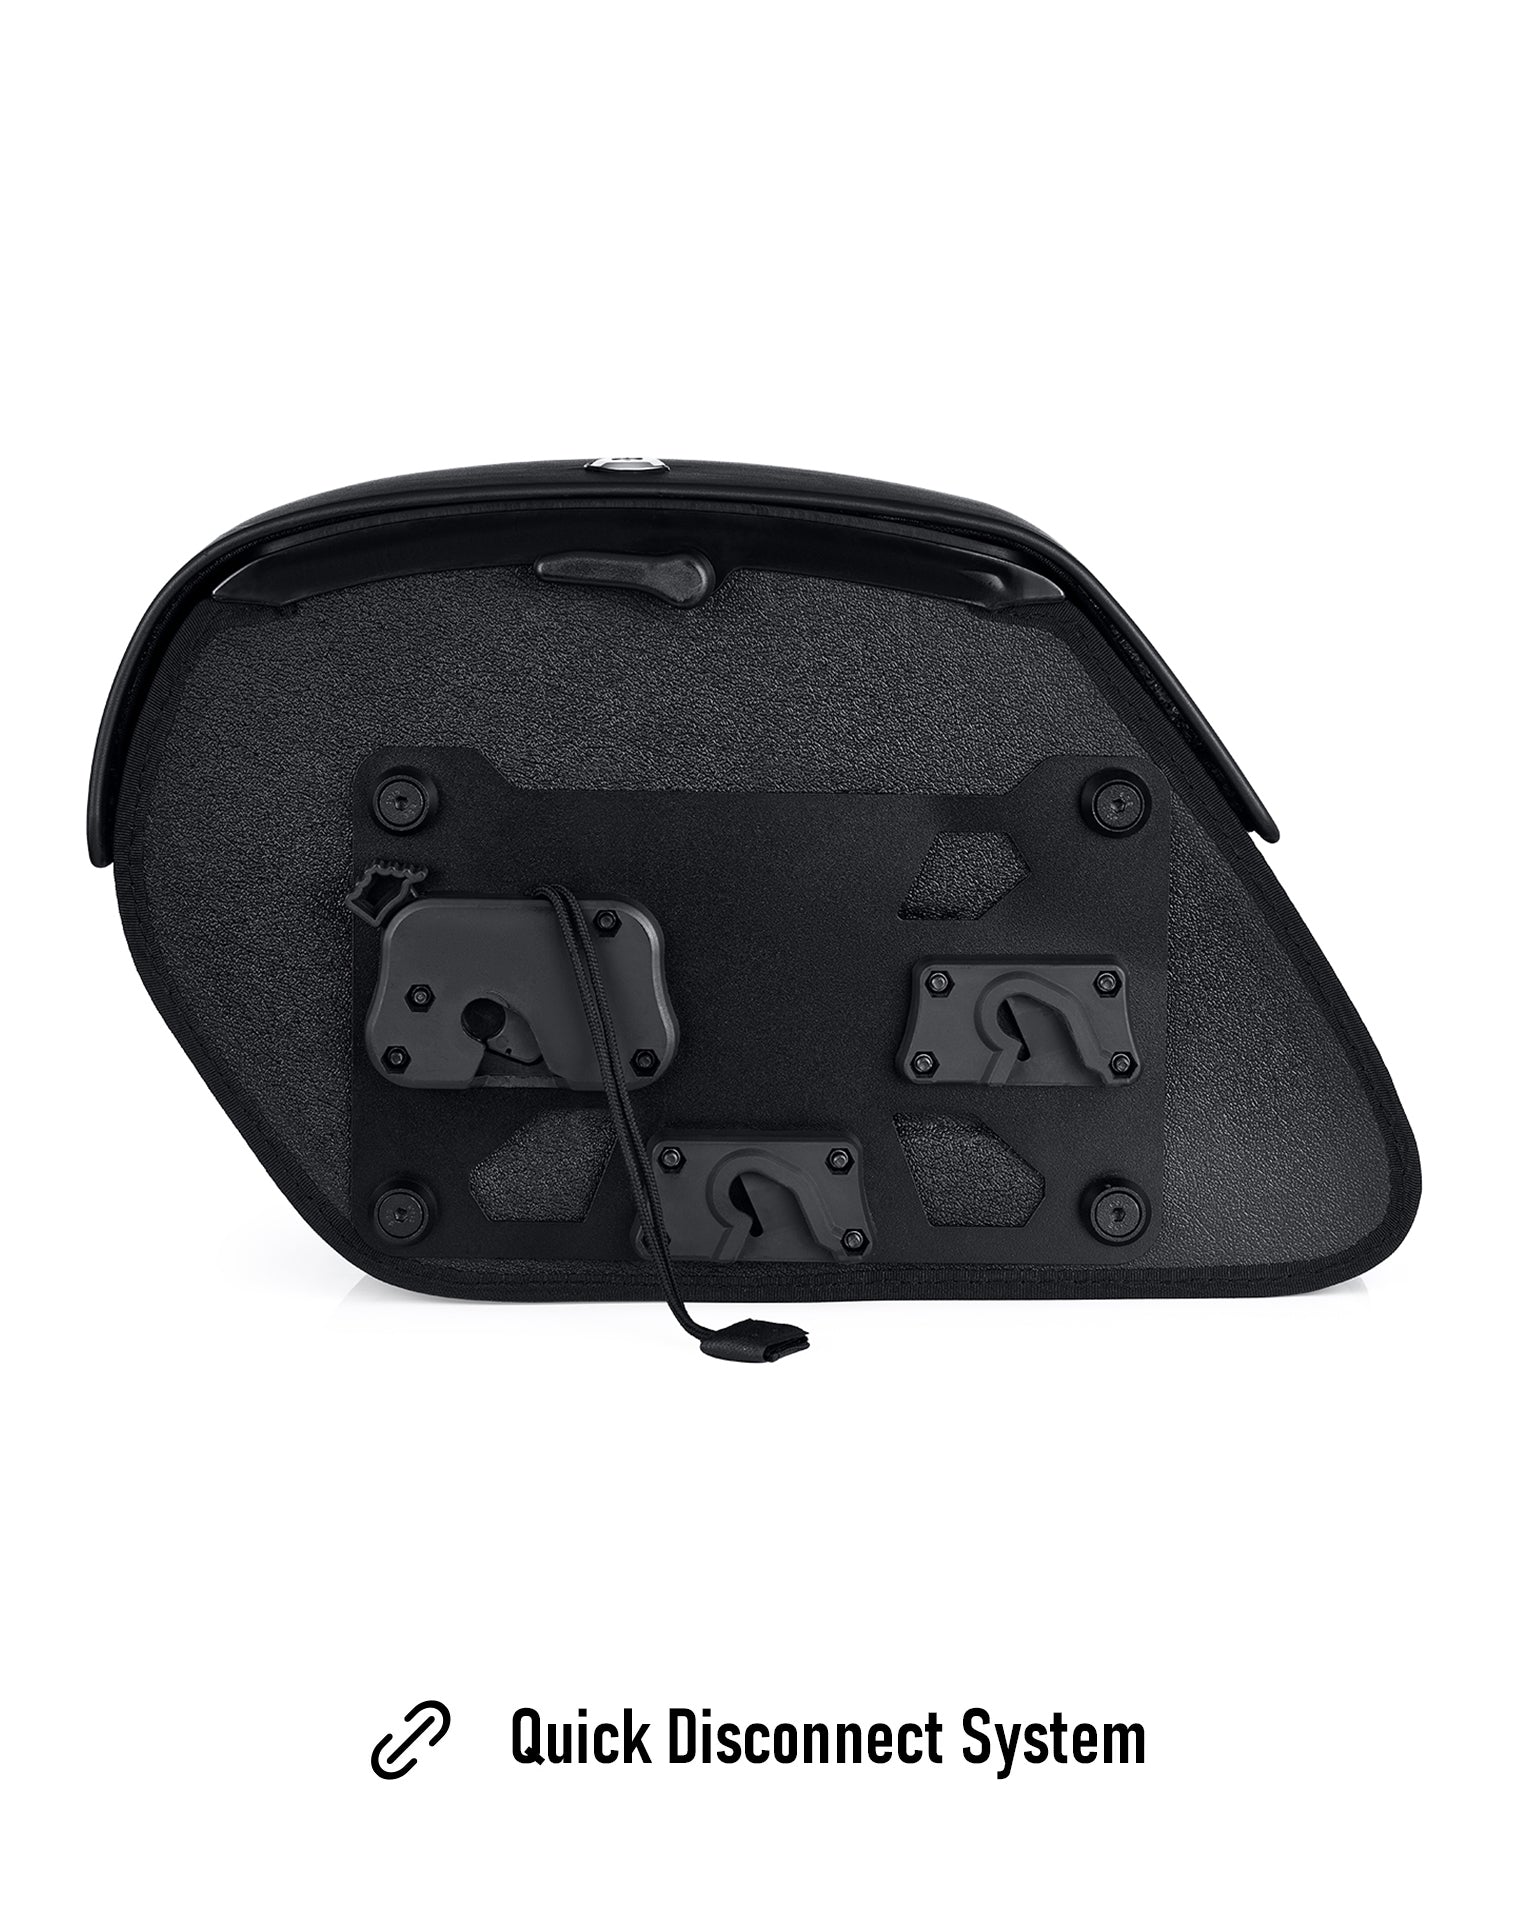 28L - Pantheon Medium Quick-Mount Motorcycle Saddlebags For Harley Sportster 883 Custom XL883C/XLH883C Quick Disconnect System